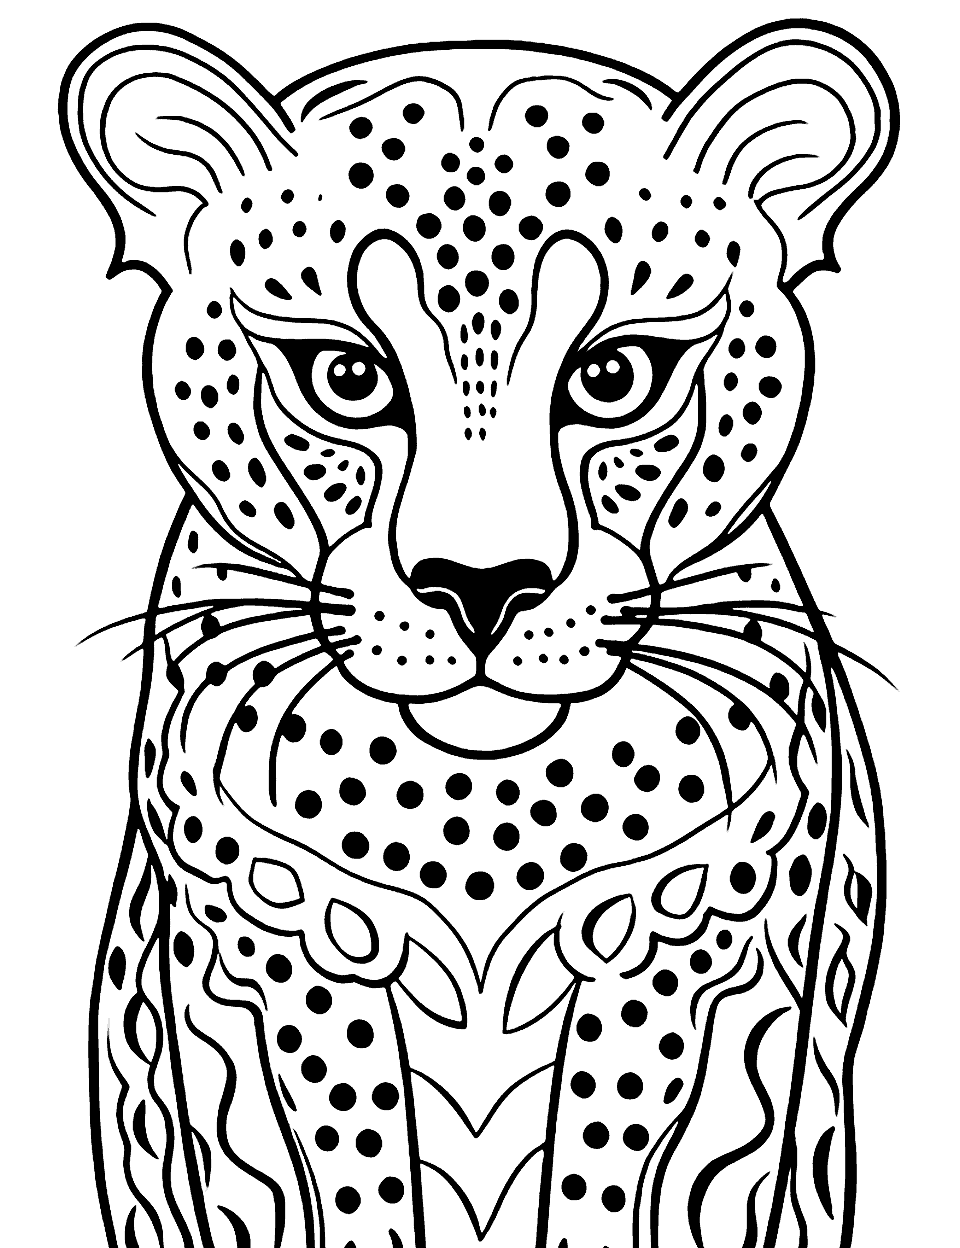 Cheetah with Tribal Markings Coloring Page - A cheetah decorated with tribal-inspired body markings.